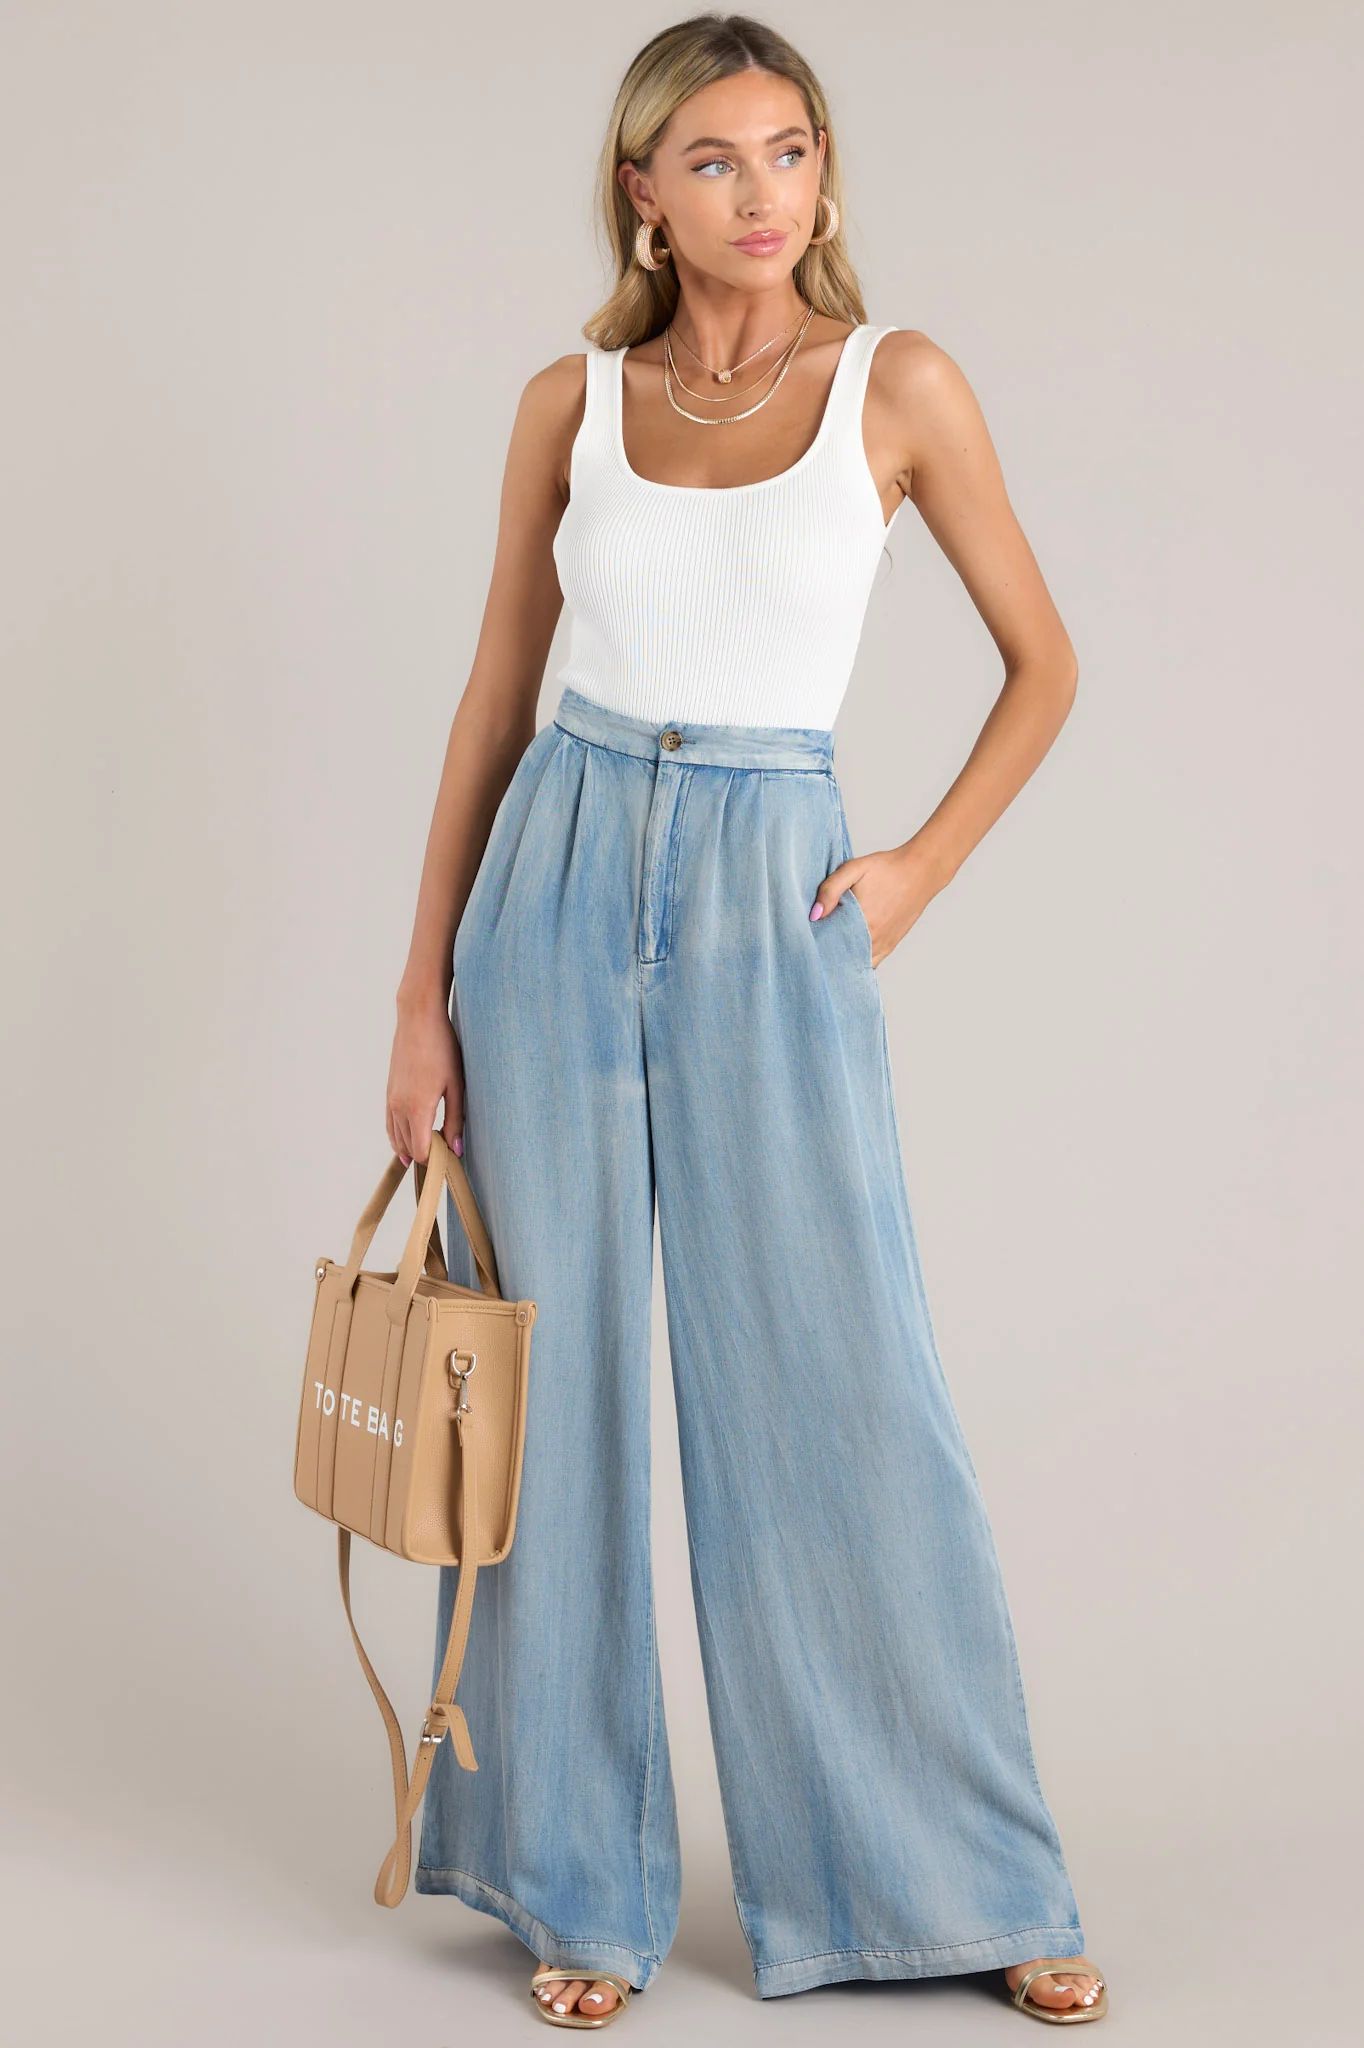 Out Past Curfew Chambray Dusty Blue Pants | Red Dress